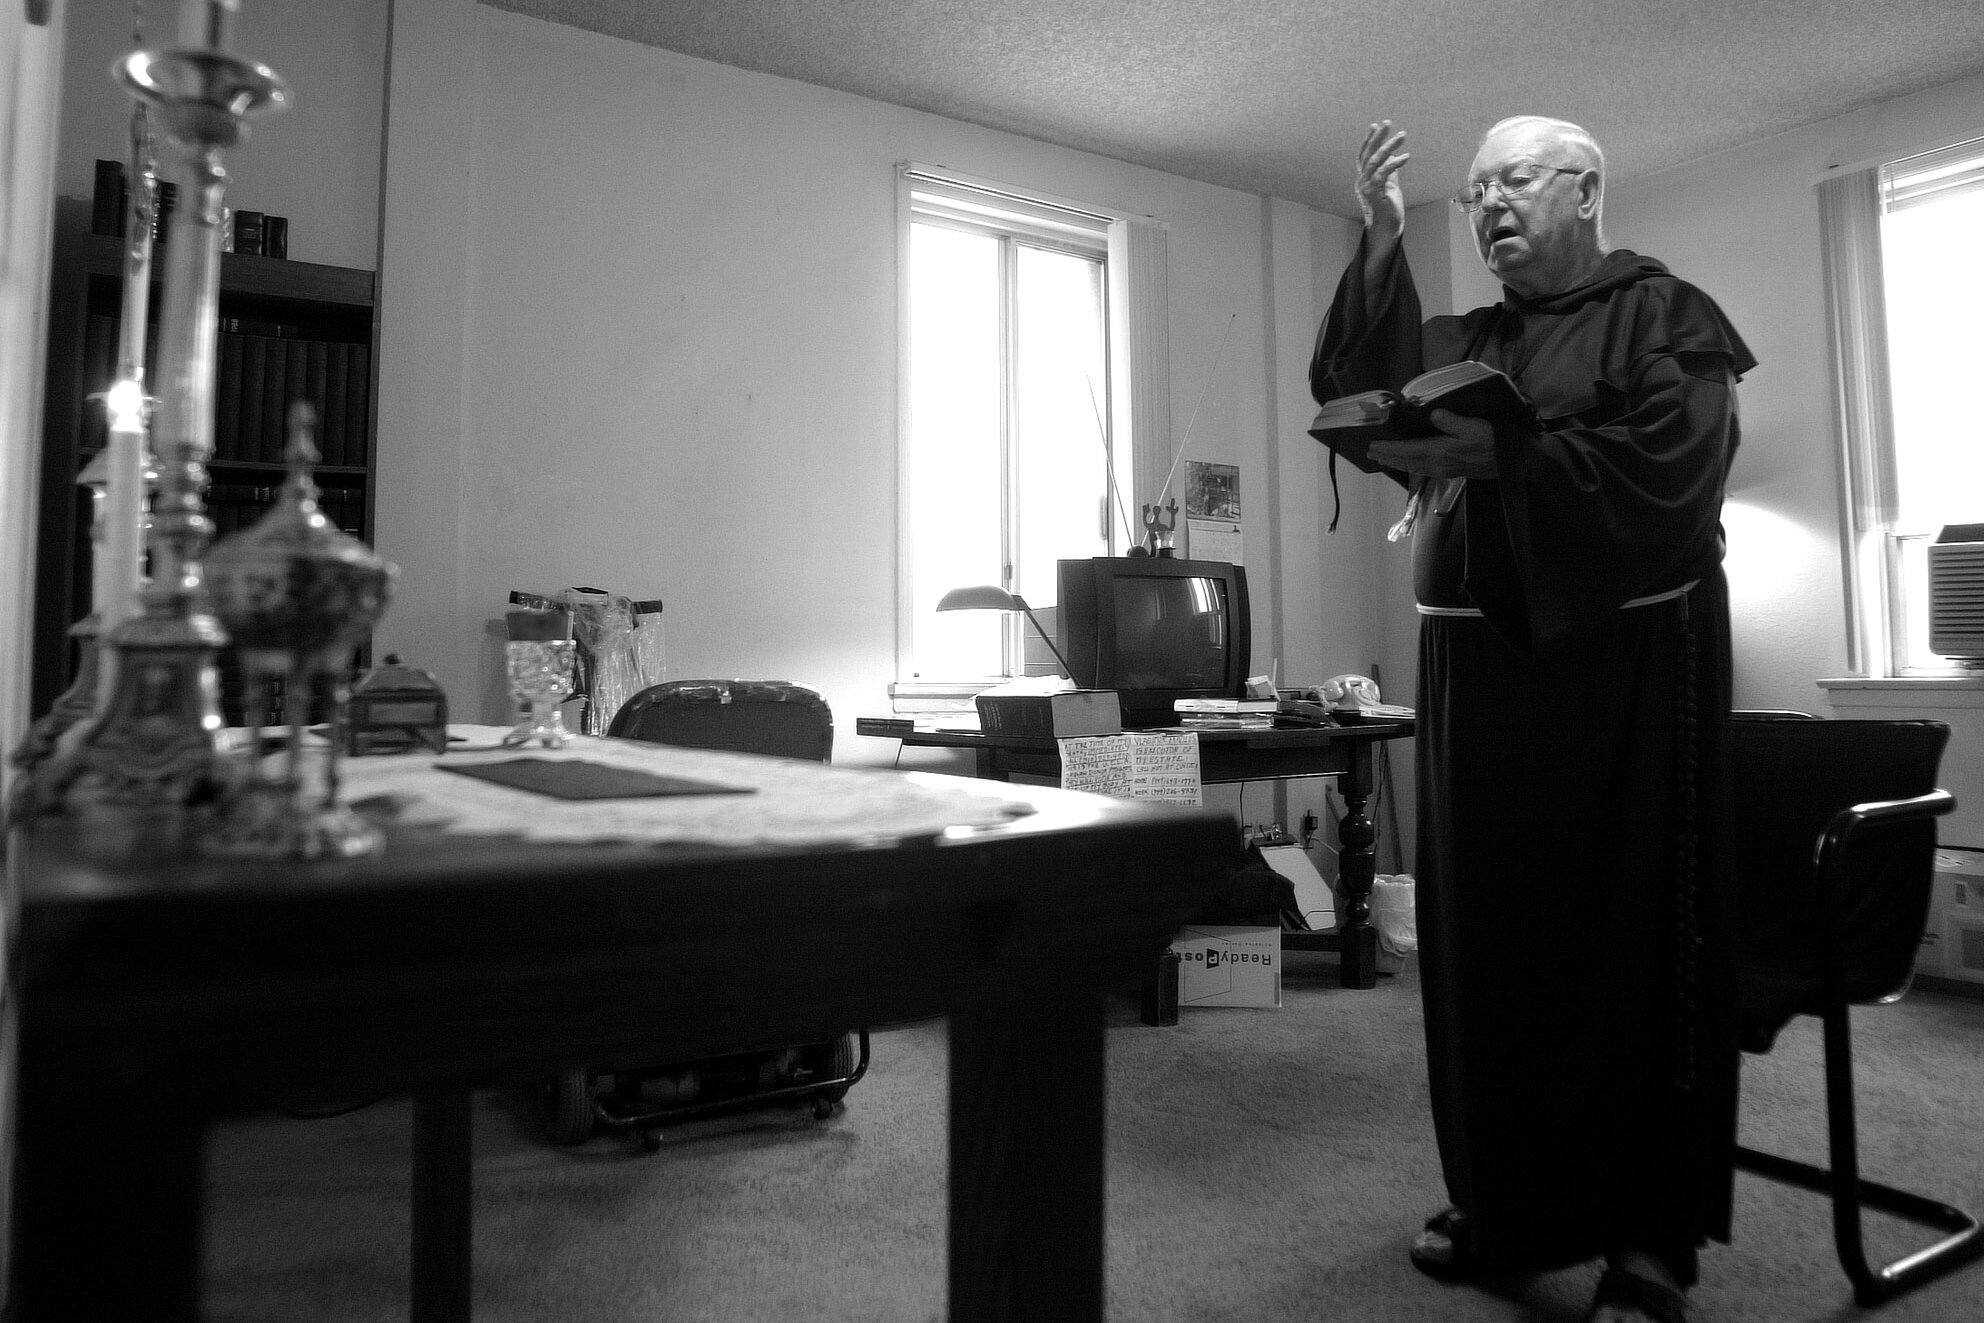  Harry Barton at the altar he has set up in his apartment. He is a secular Franciscan and prays numerous times a day.  